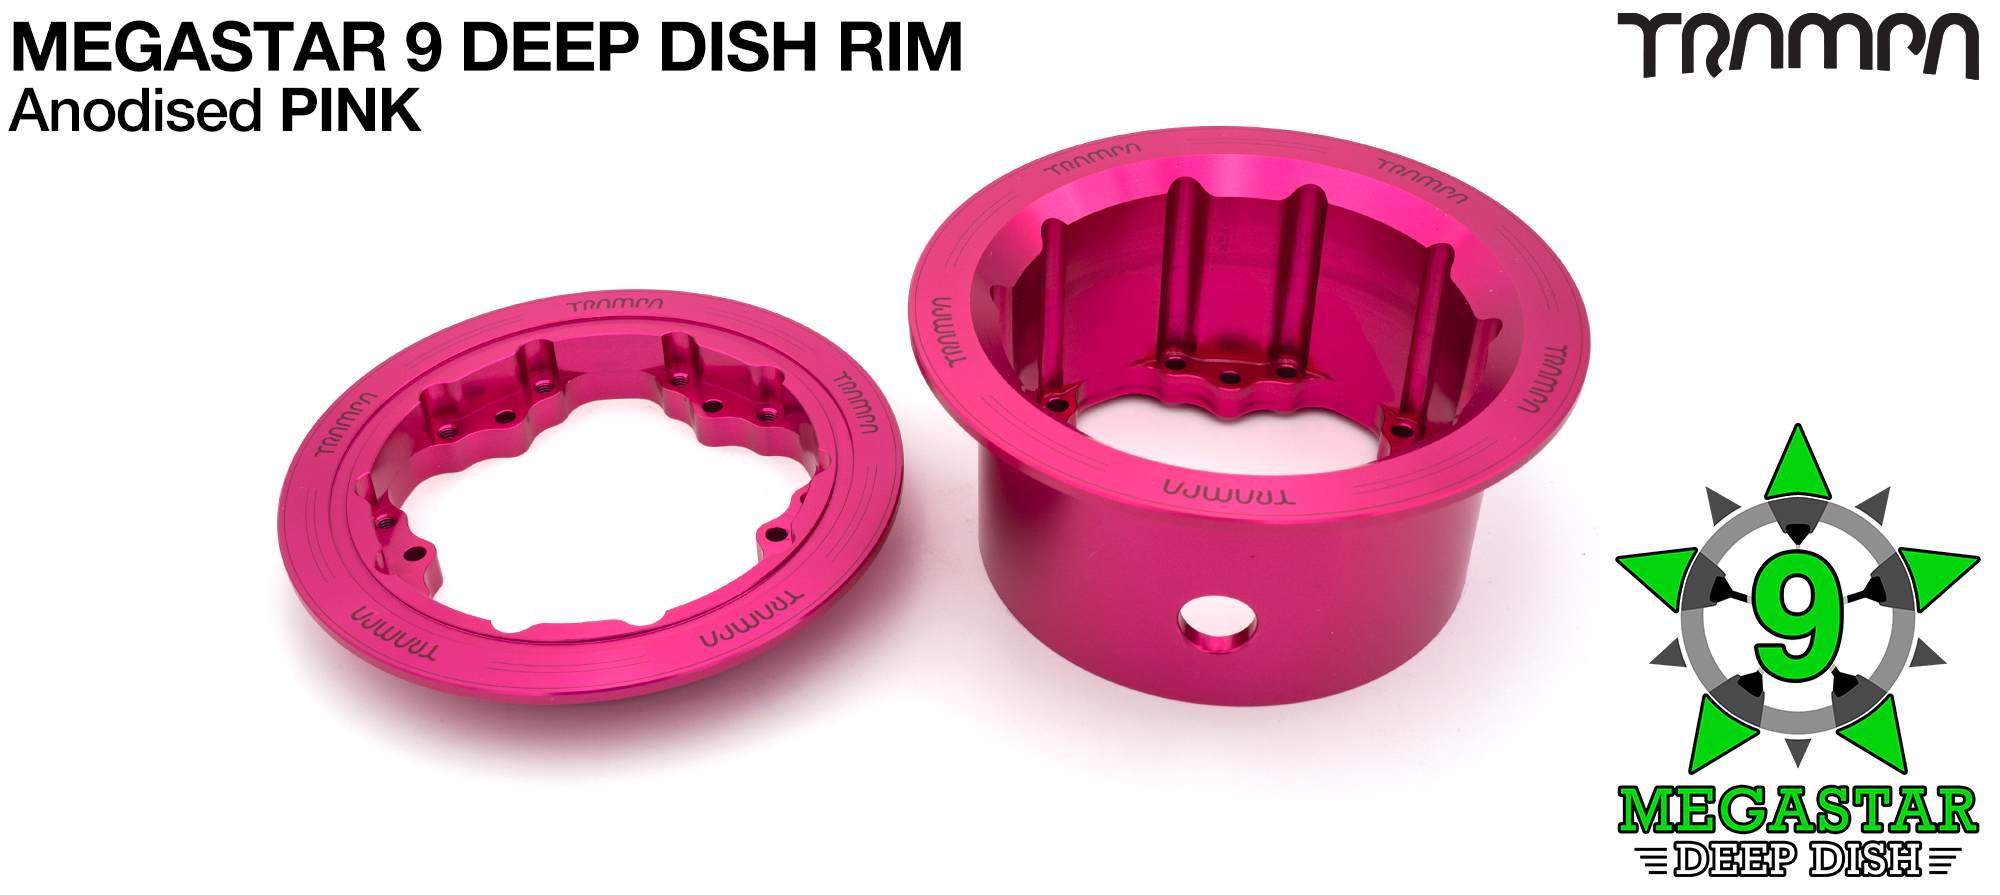 MEGASTAR 9 DD Rims Measure 3.75/4x 3 Inch. The Bearings are positioned DEEP-DISH OFF-SET & accept 3.75 & 4 Inch Rim Tyres - PINK